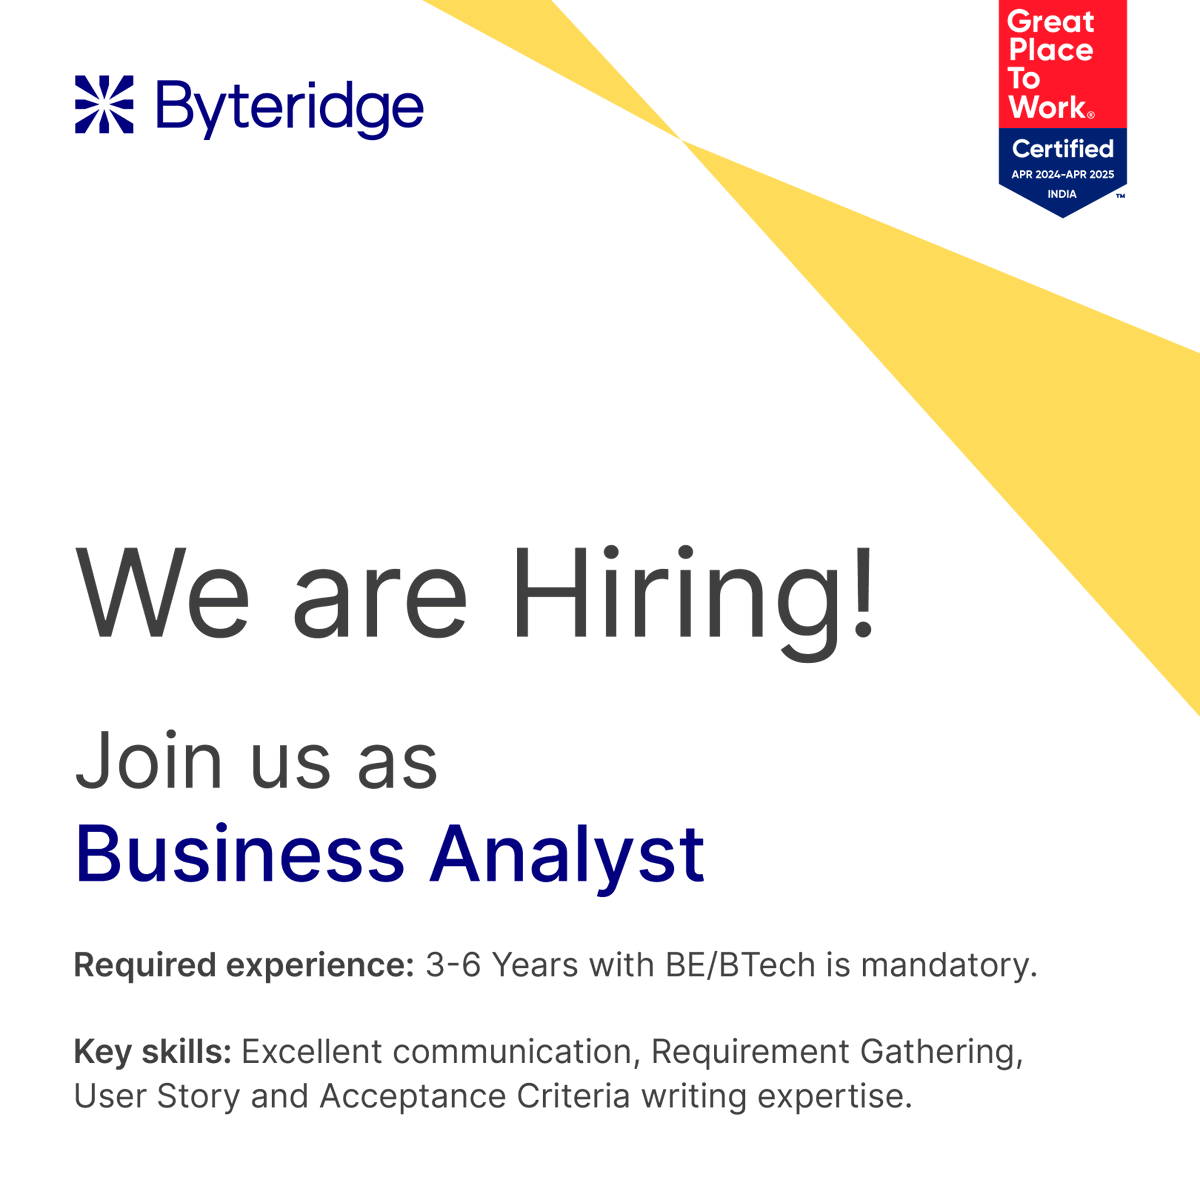 Ready to shape the future? Join us as a Business Analyst! 
Apply Now: app.turbohire.co/get/TDhhVXB

#BusinessAnalyst #NowHiring #JobsInTech #RemoteWorking